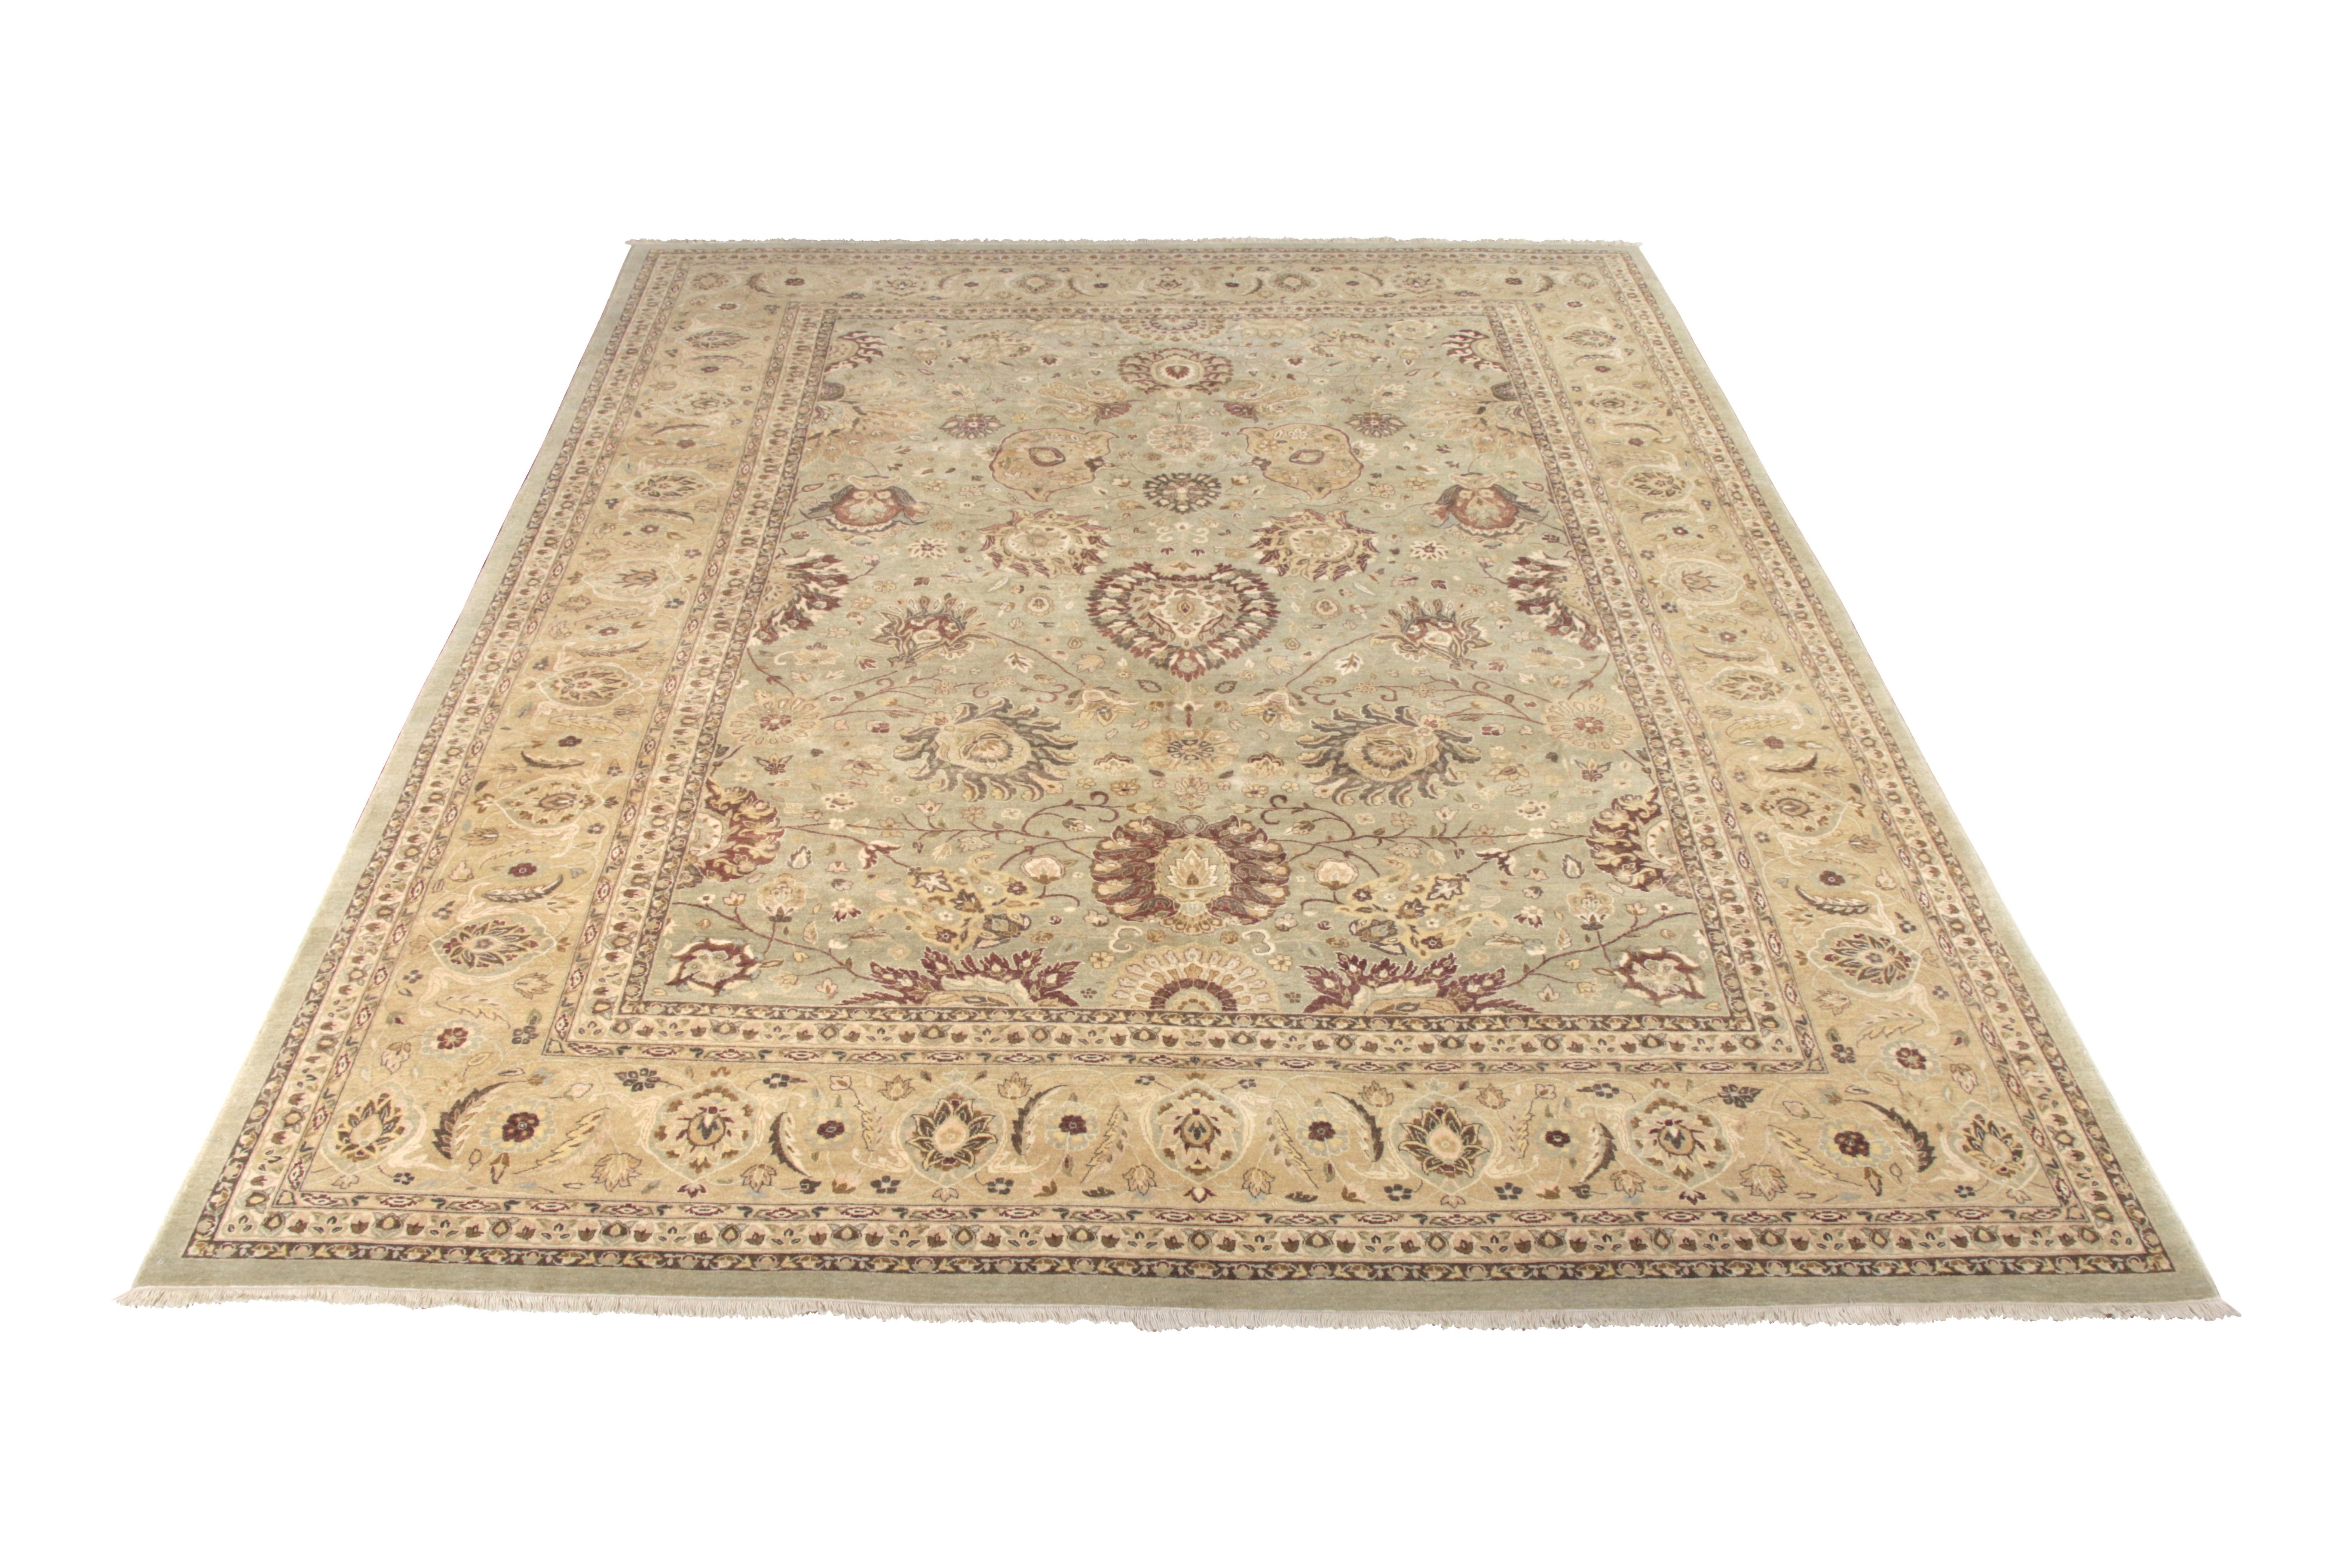 Pakistani Rug & Kilim's Classic Persian Style Rug, Blue Field, Beige-Brown Floral Pattern For Sale